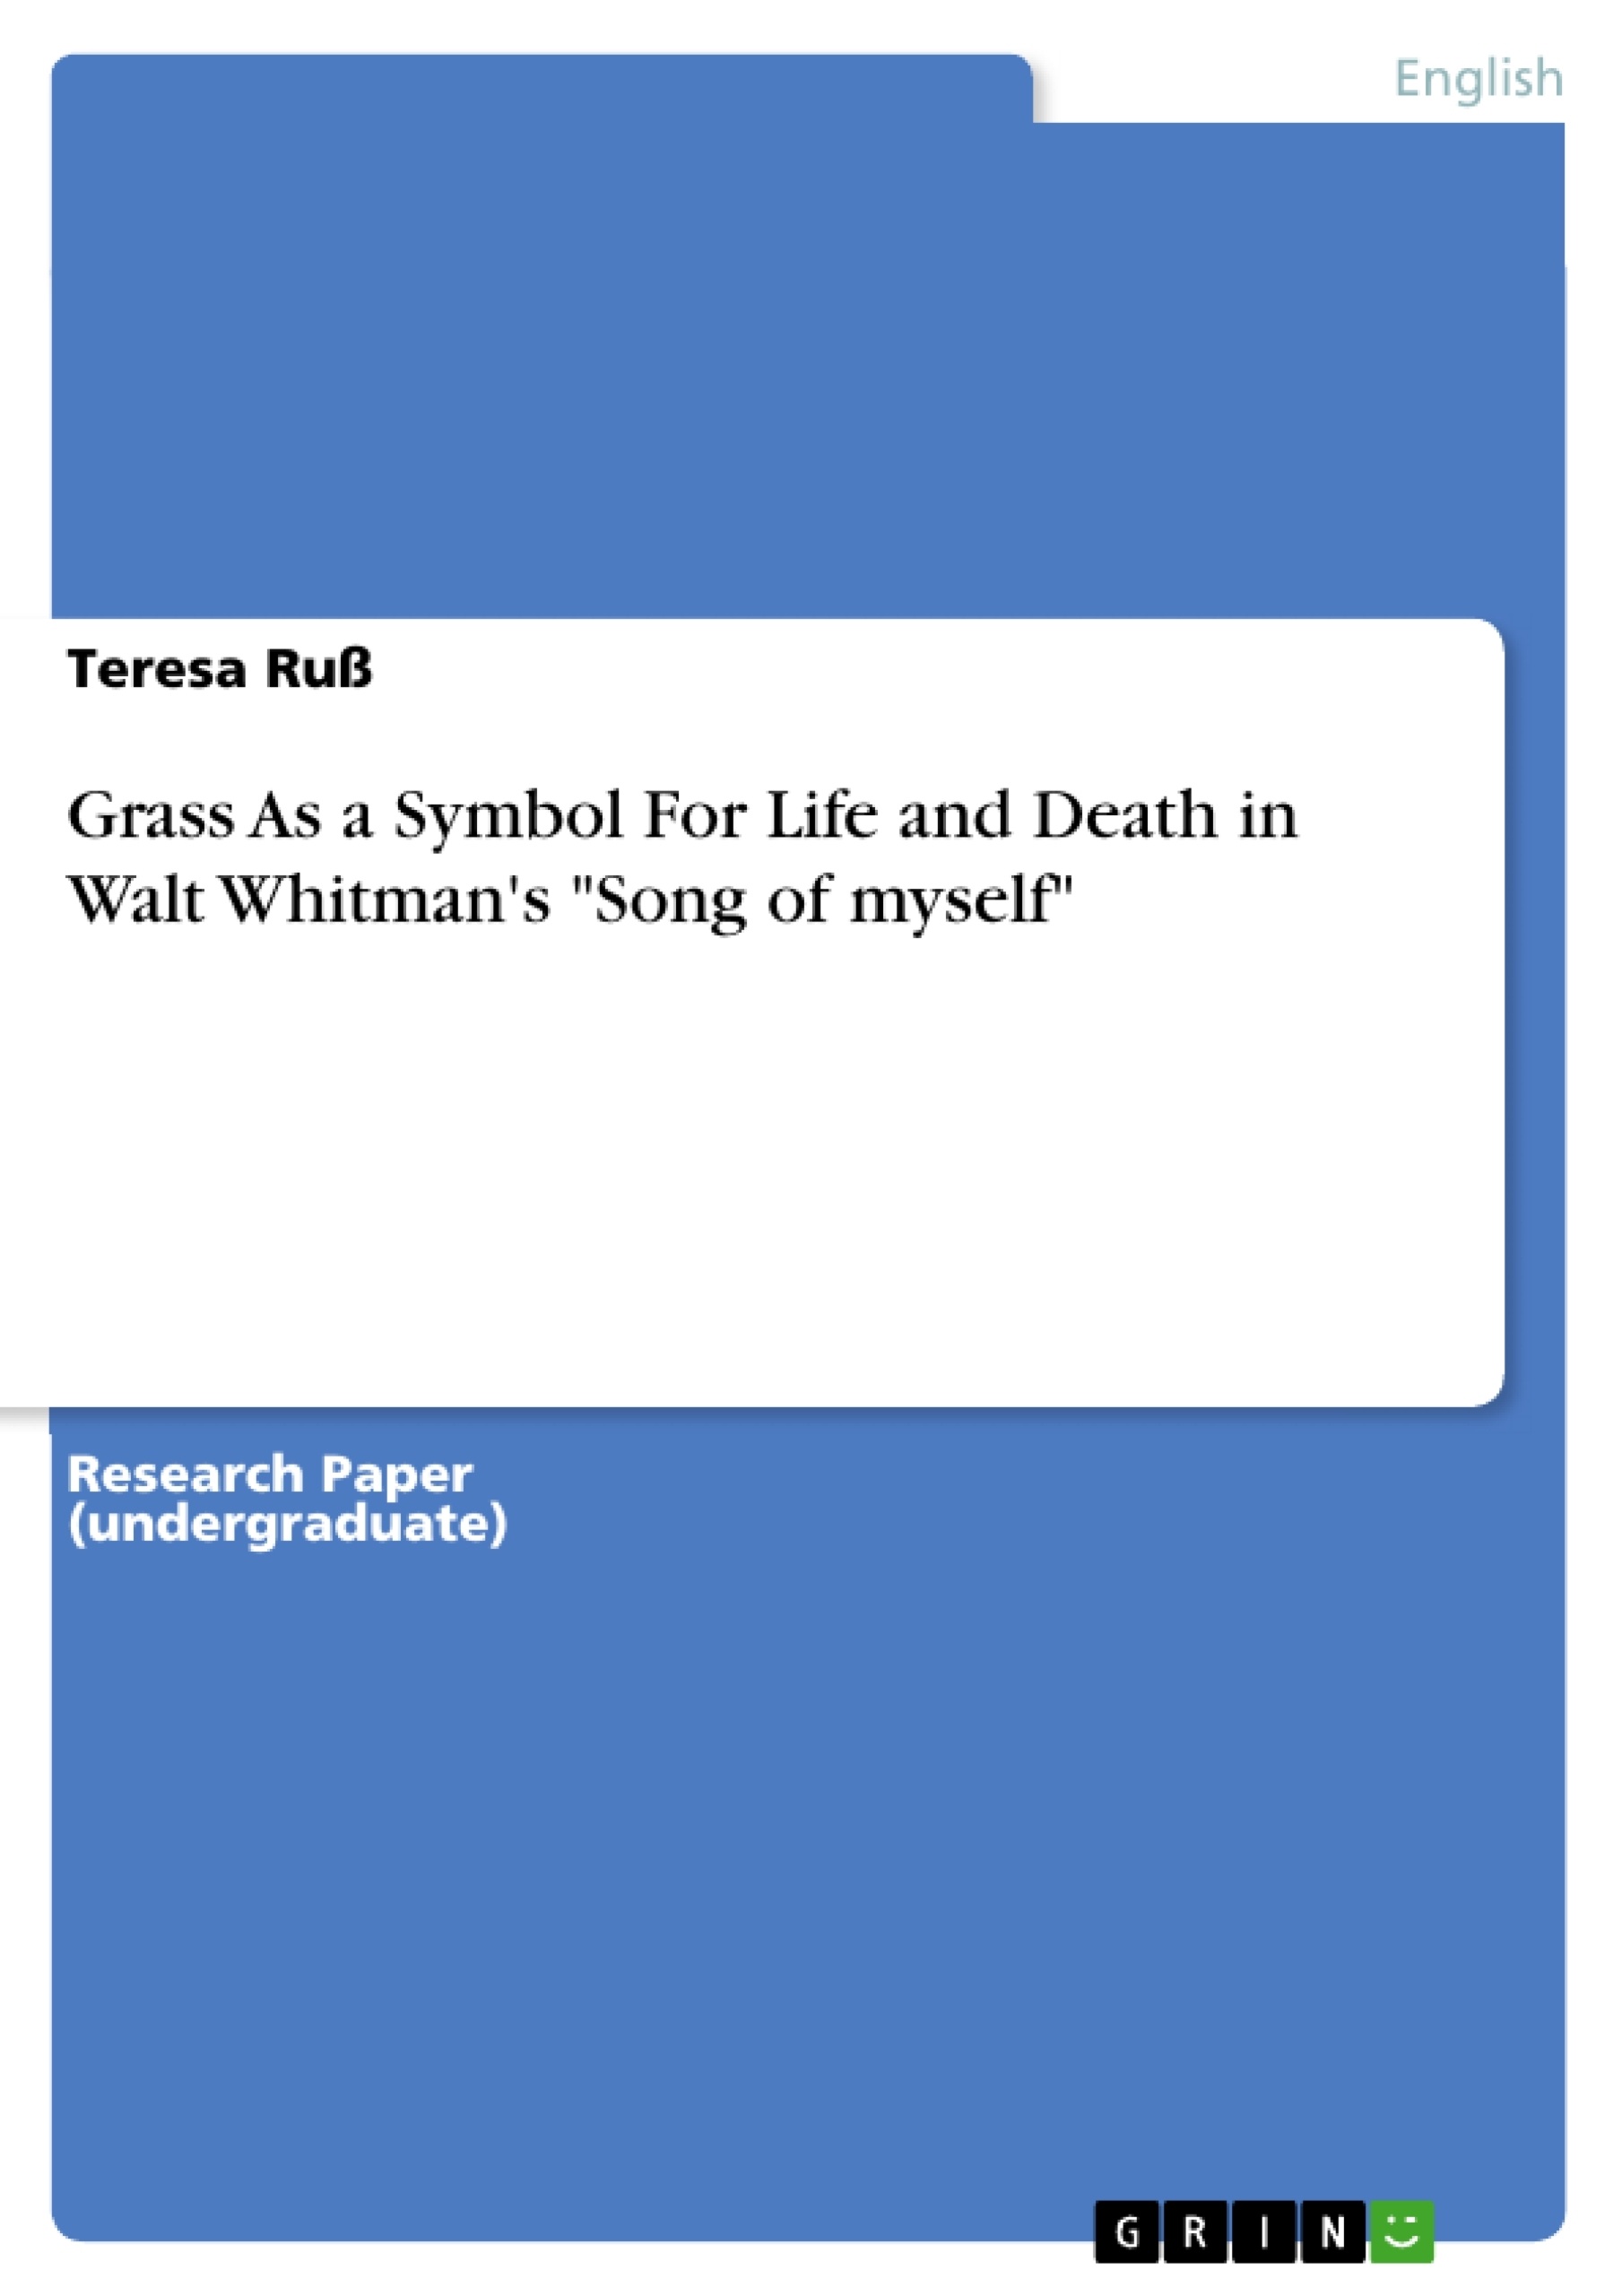 Título: Grass As a Symbol For Life and Death in Walt Whitman's "Song of myself"